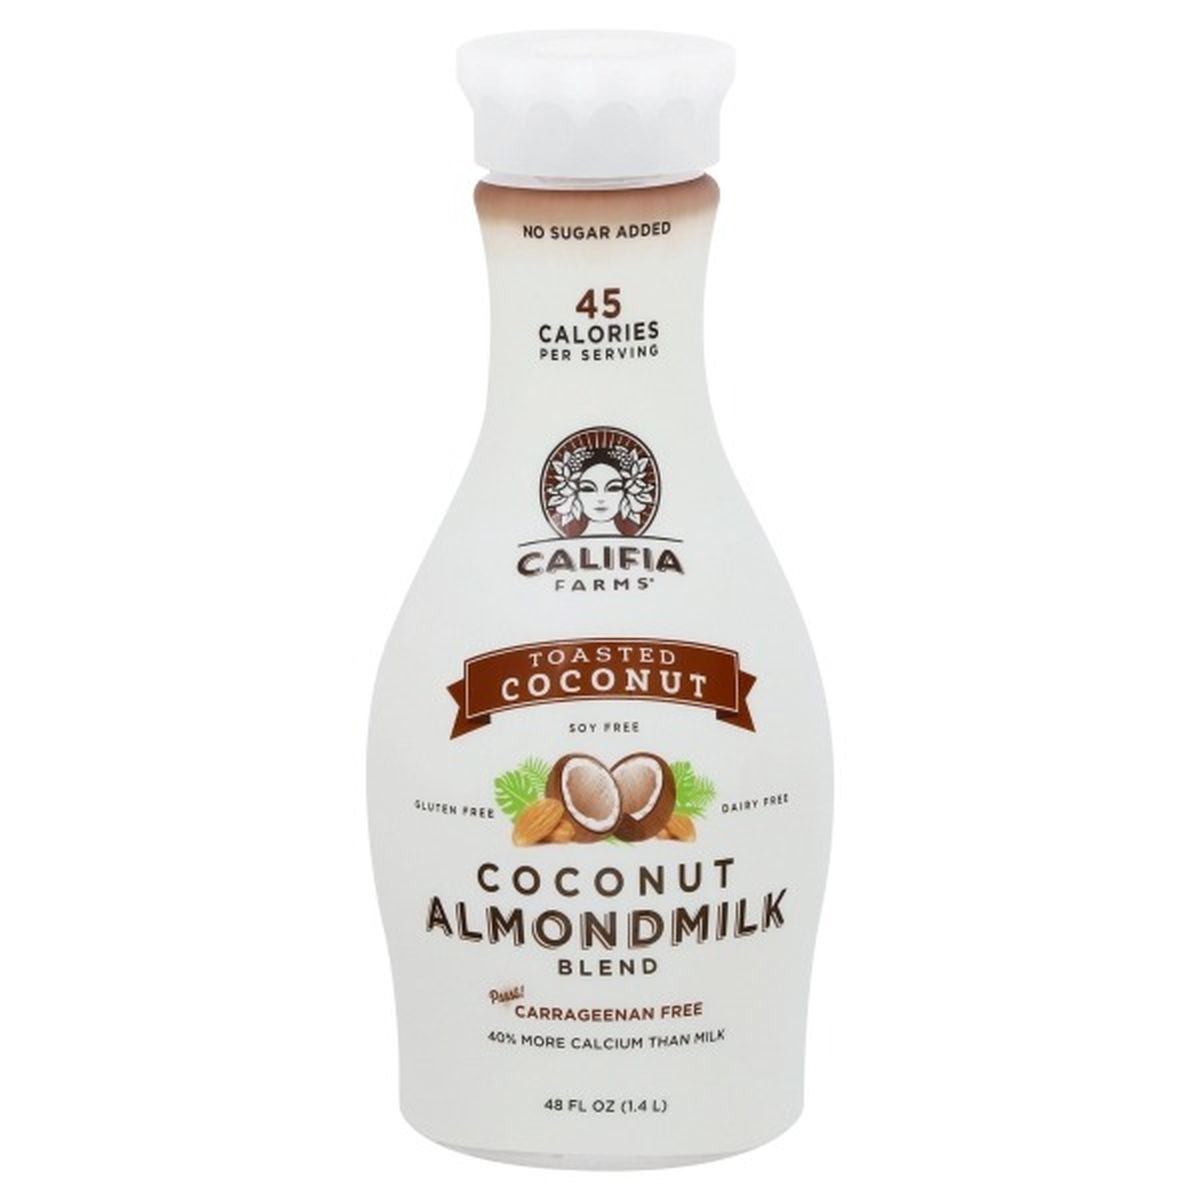 Calories in Califia Farms Almond Milk Blend, Coconut, Toasted